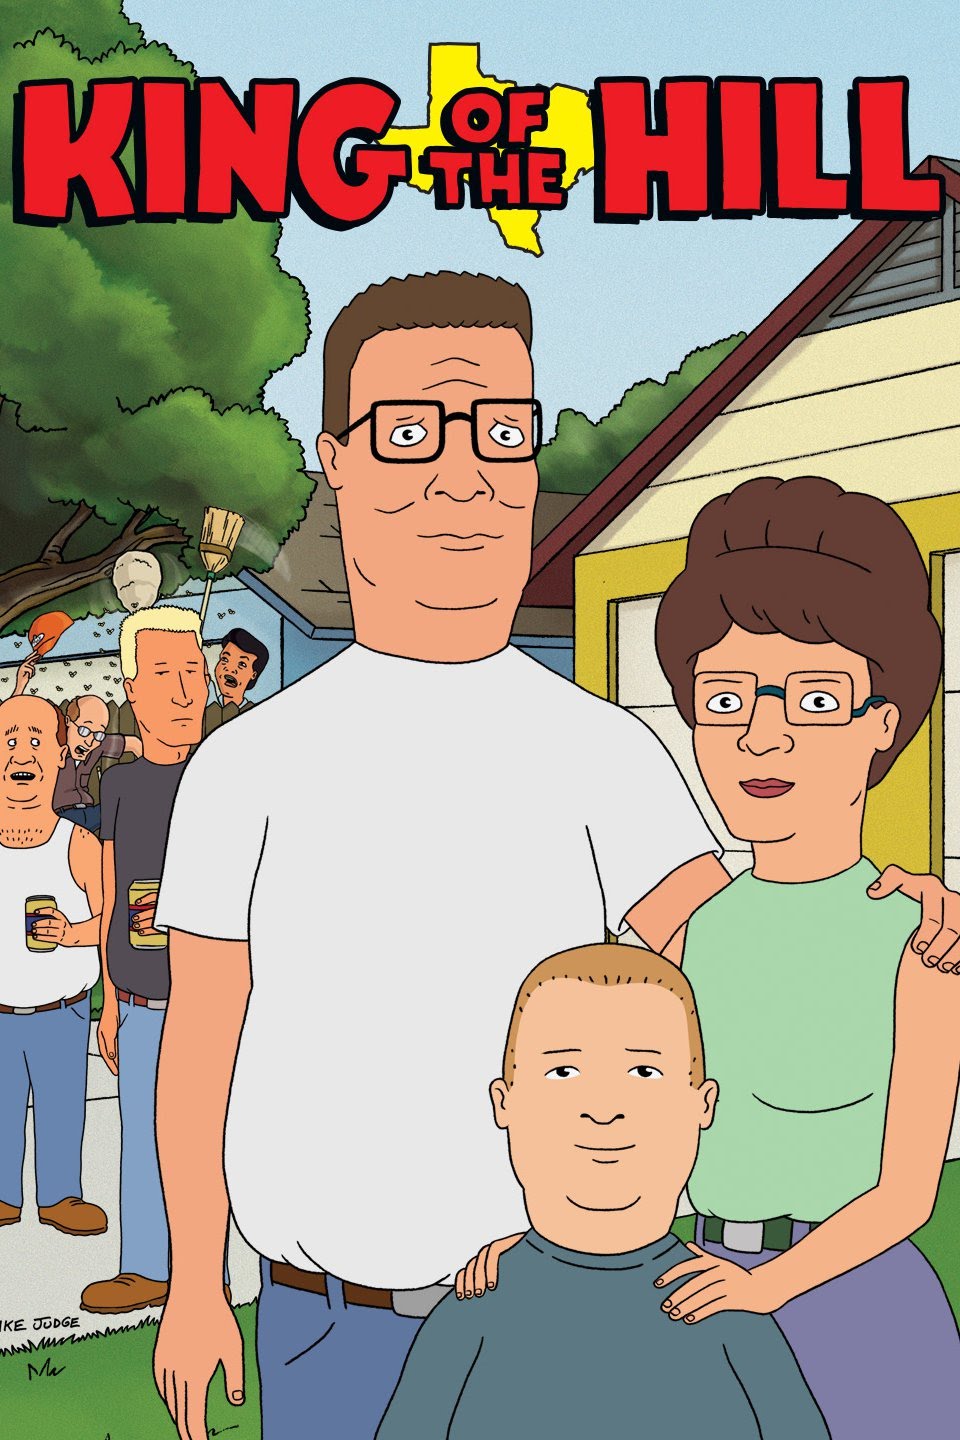 King Of The Hill Full Episodes 🔴 King Of The Hill Live Stream 24/7 